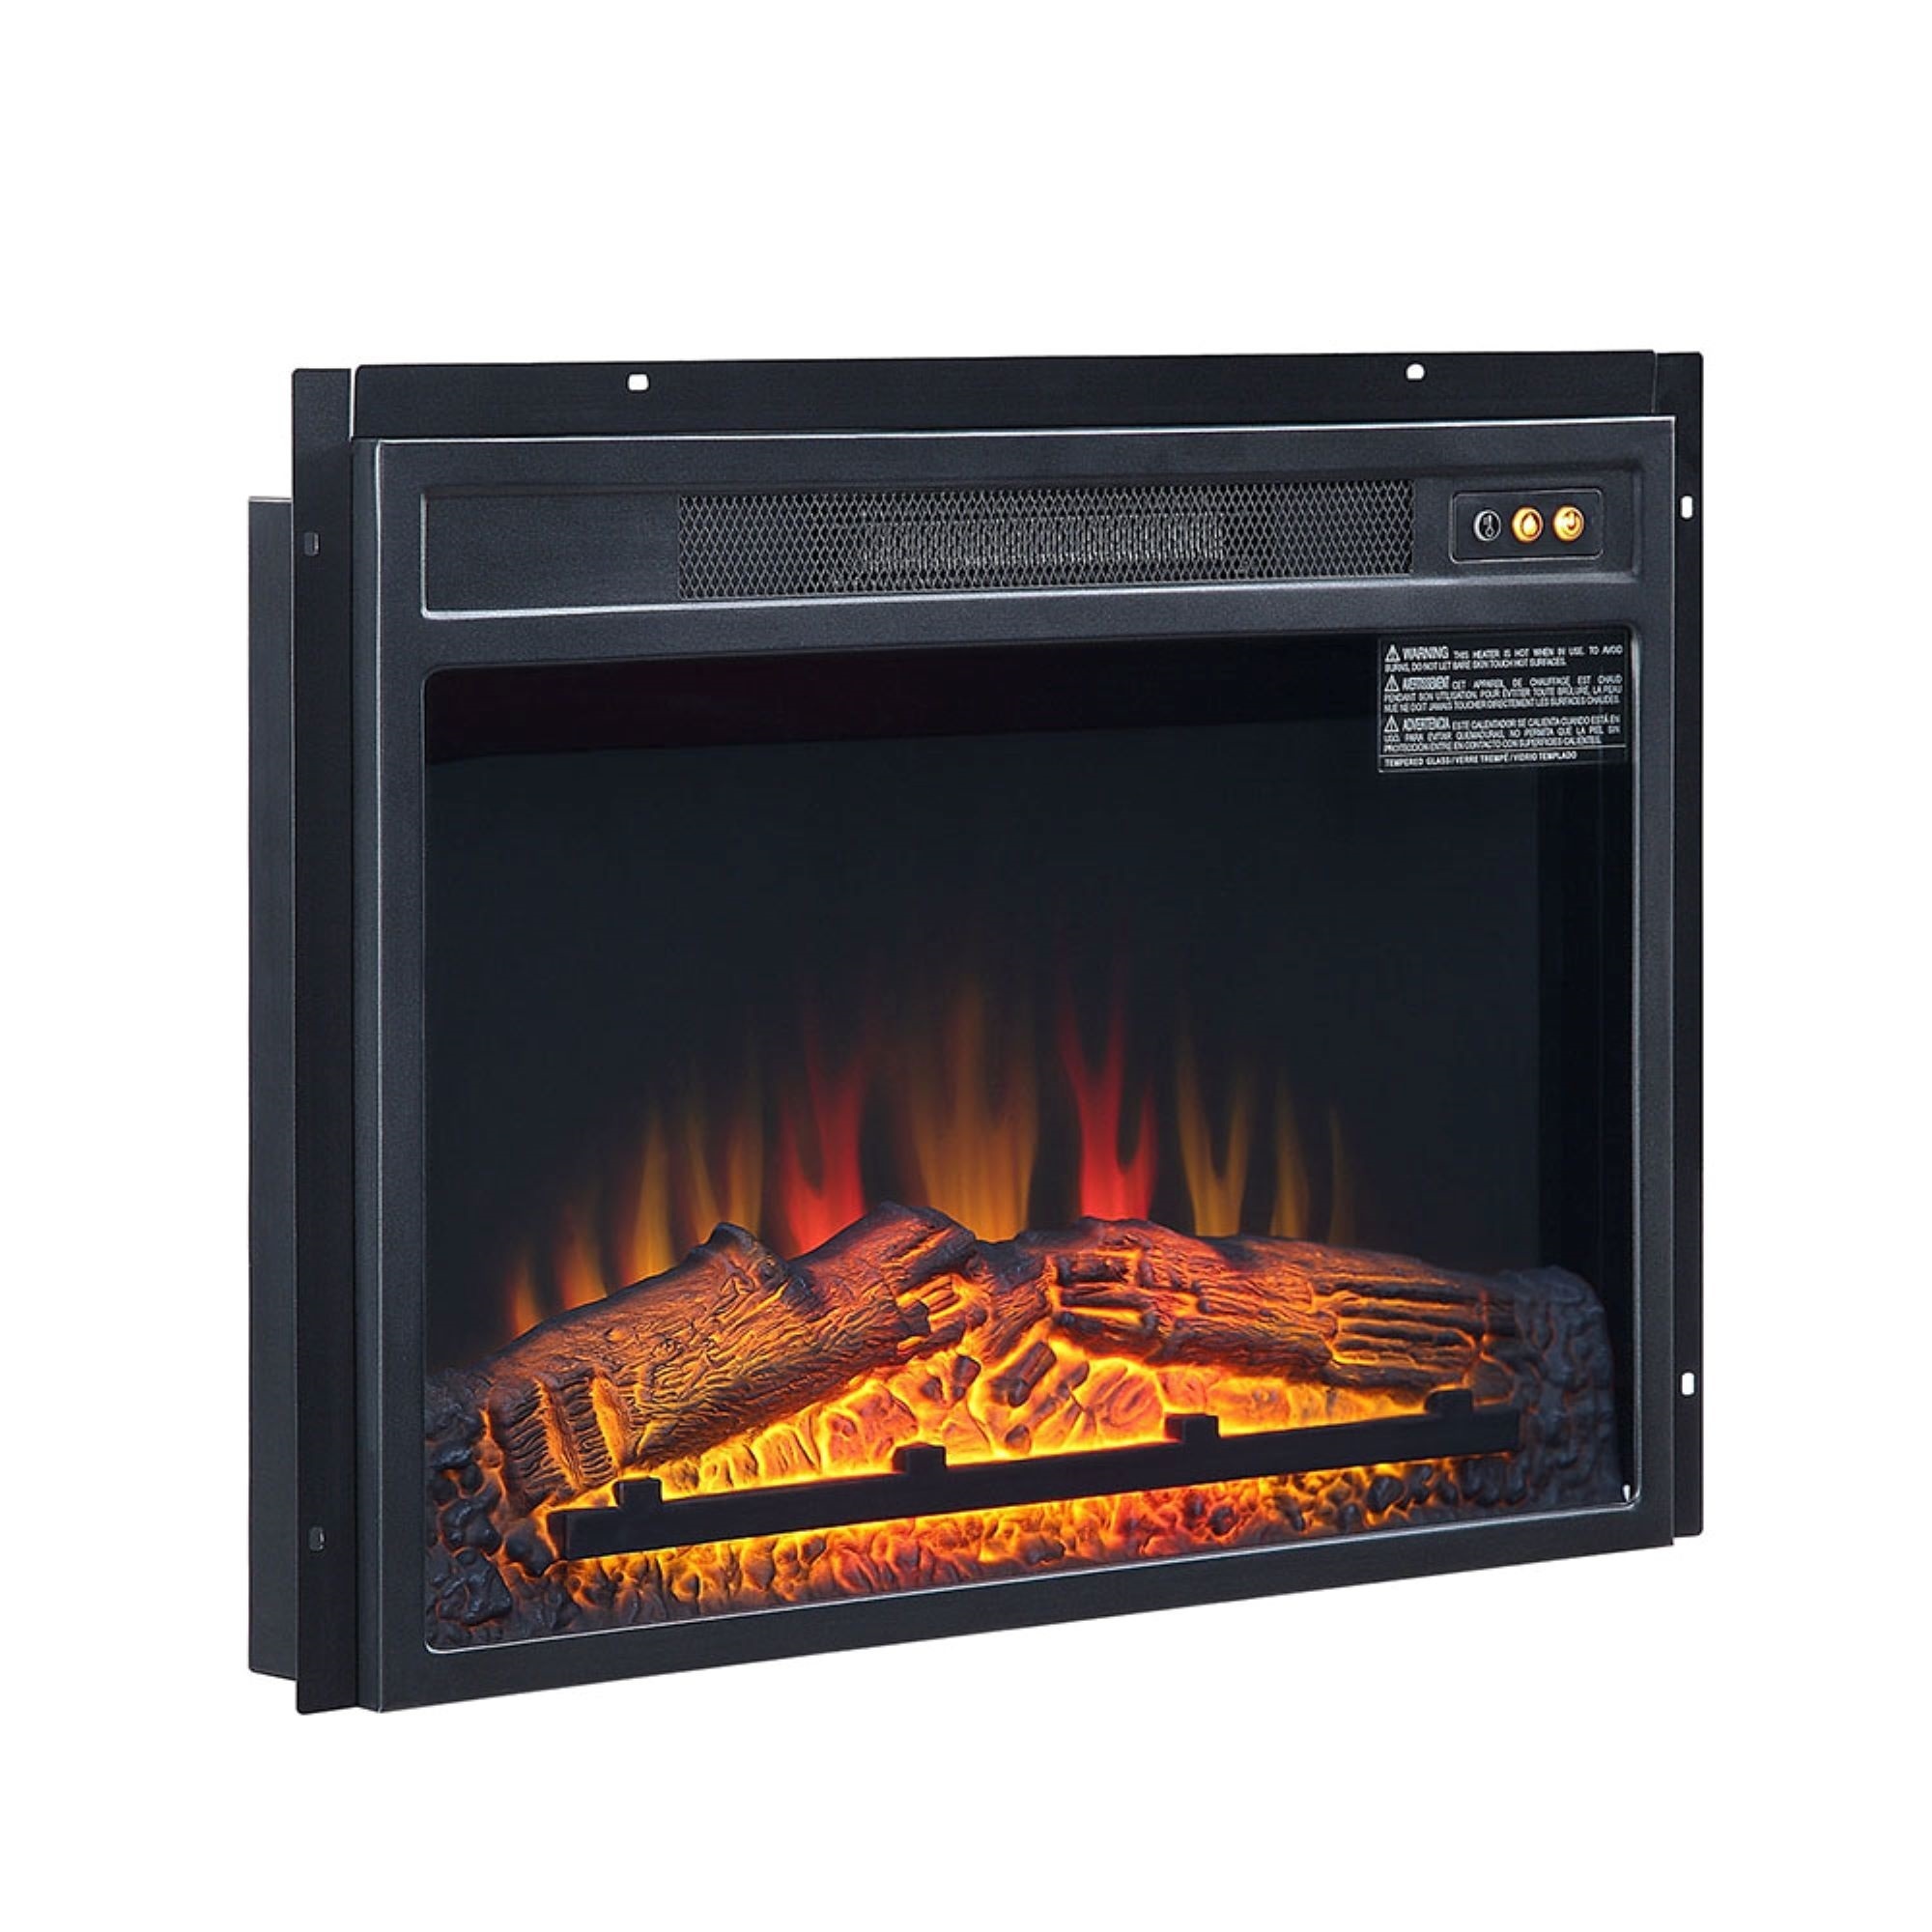 Manhattan Comfort, Electric 23Inch Fireplace Box with Heat Functionality, Width 23 in, Height 17.1 in, Depth 5 in, Model FPBOX1